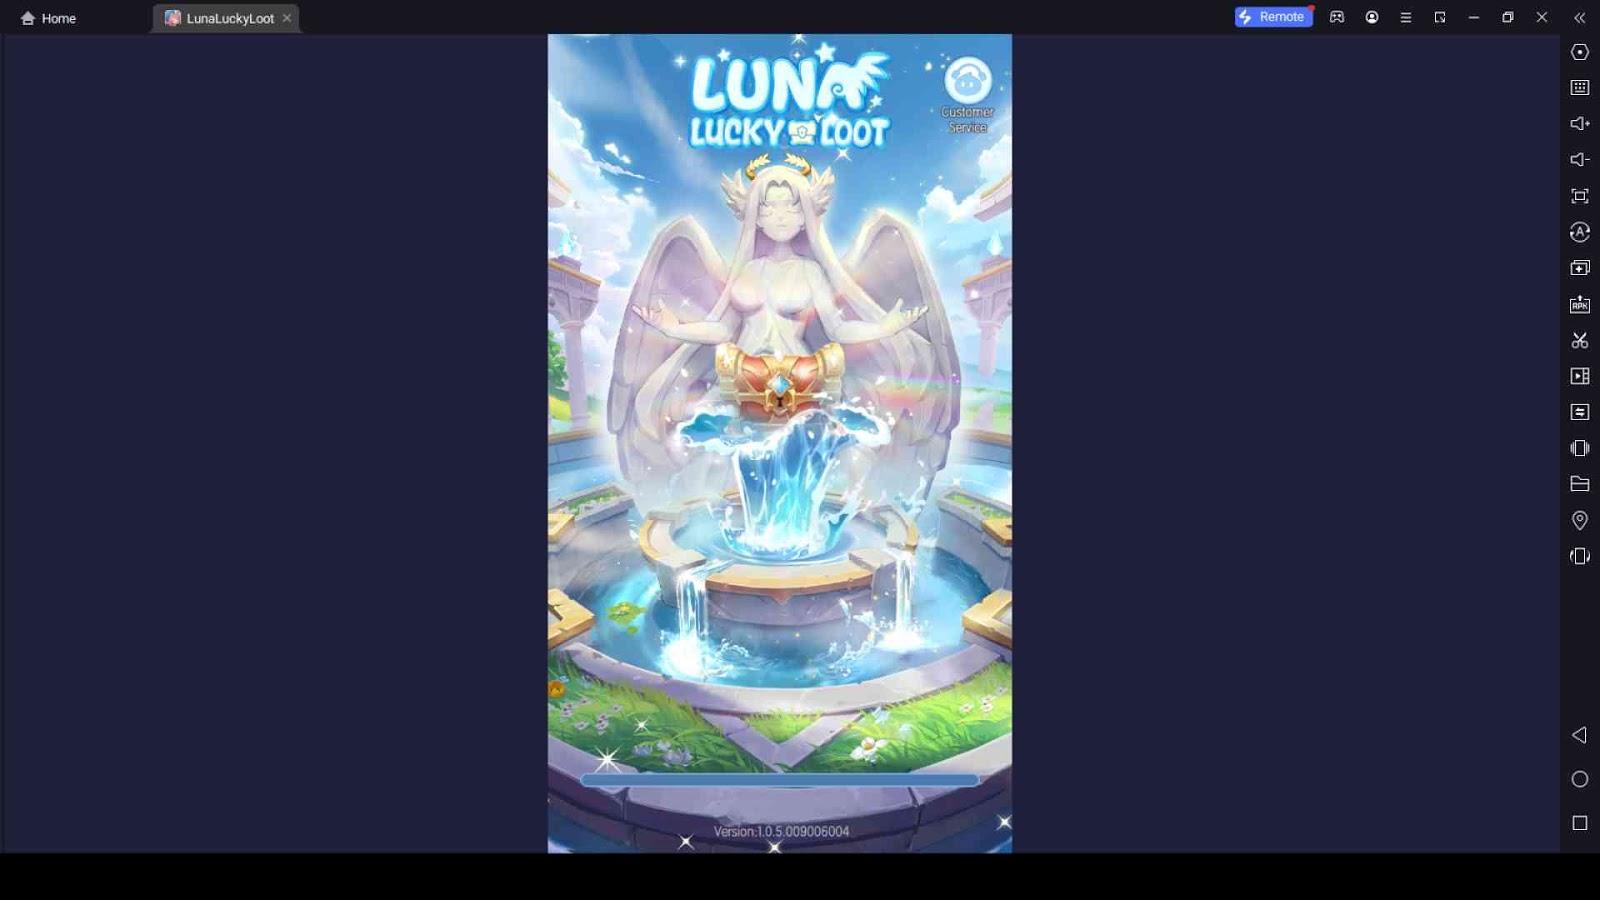 Beginner's Guide to Luna: Lucky Loot